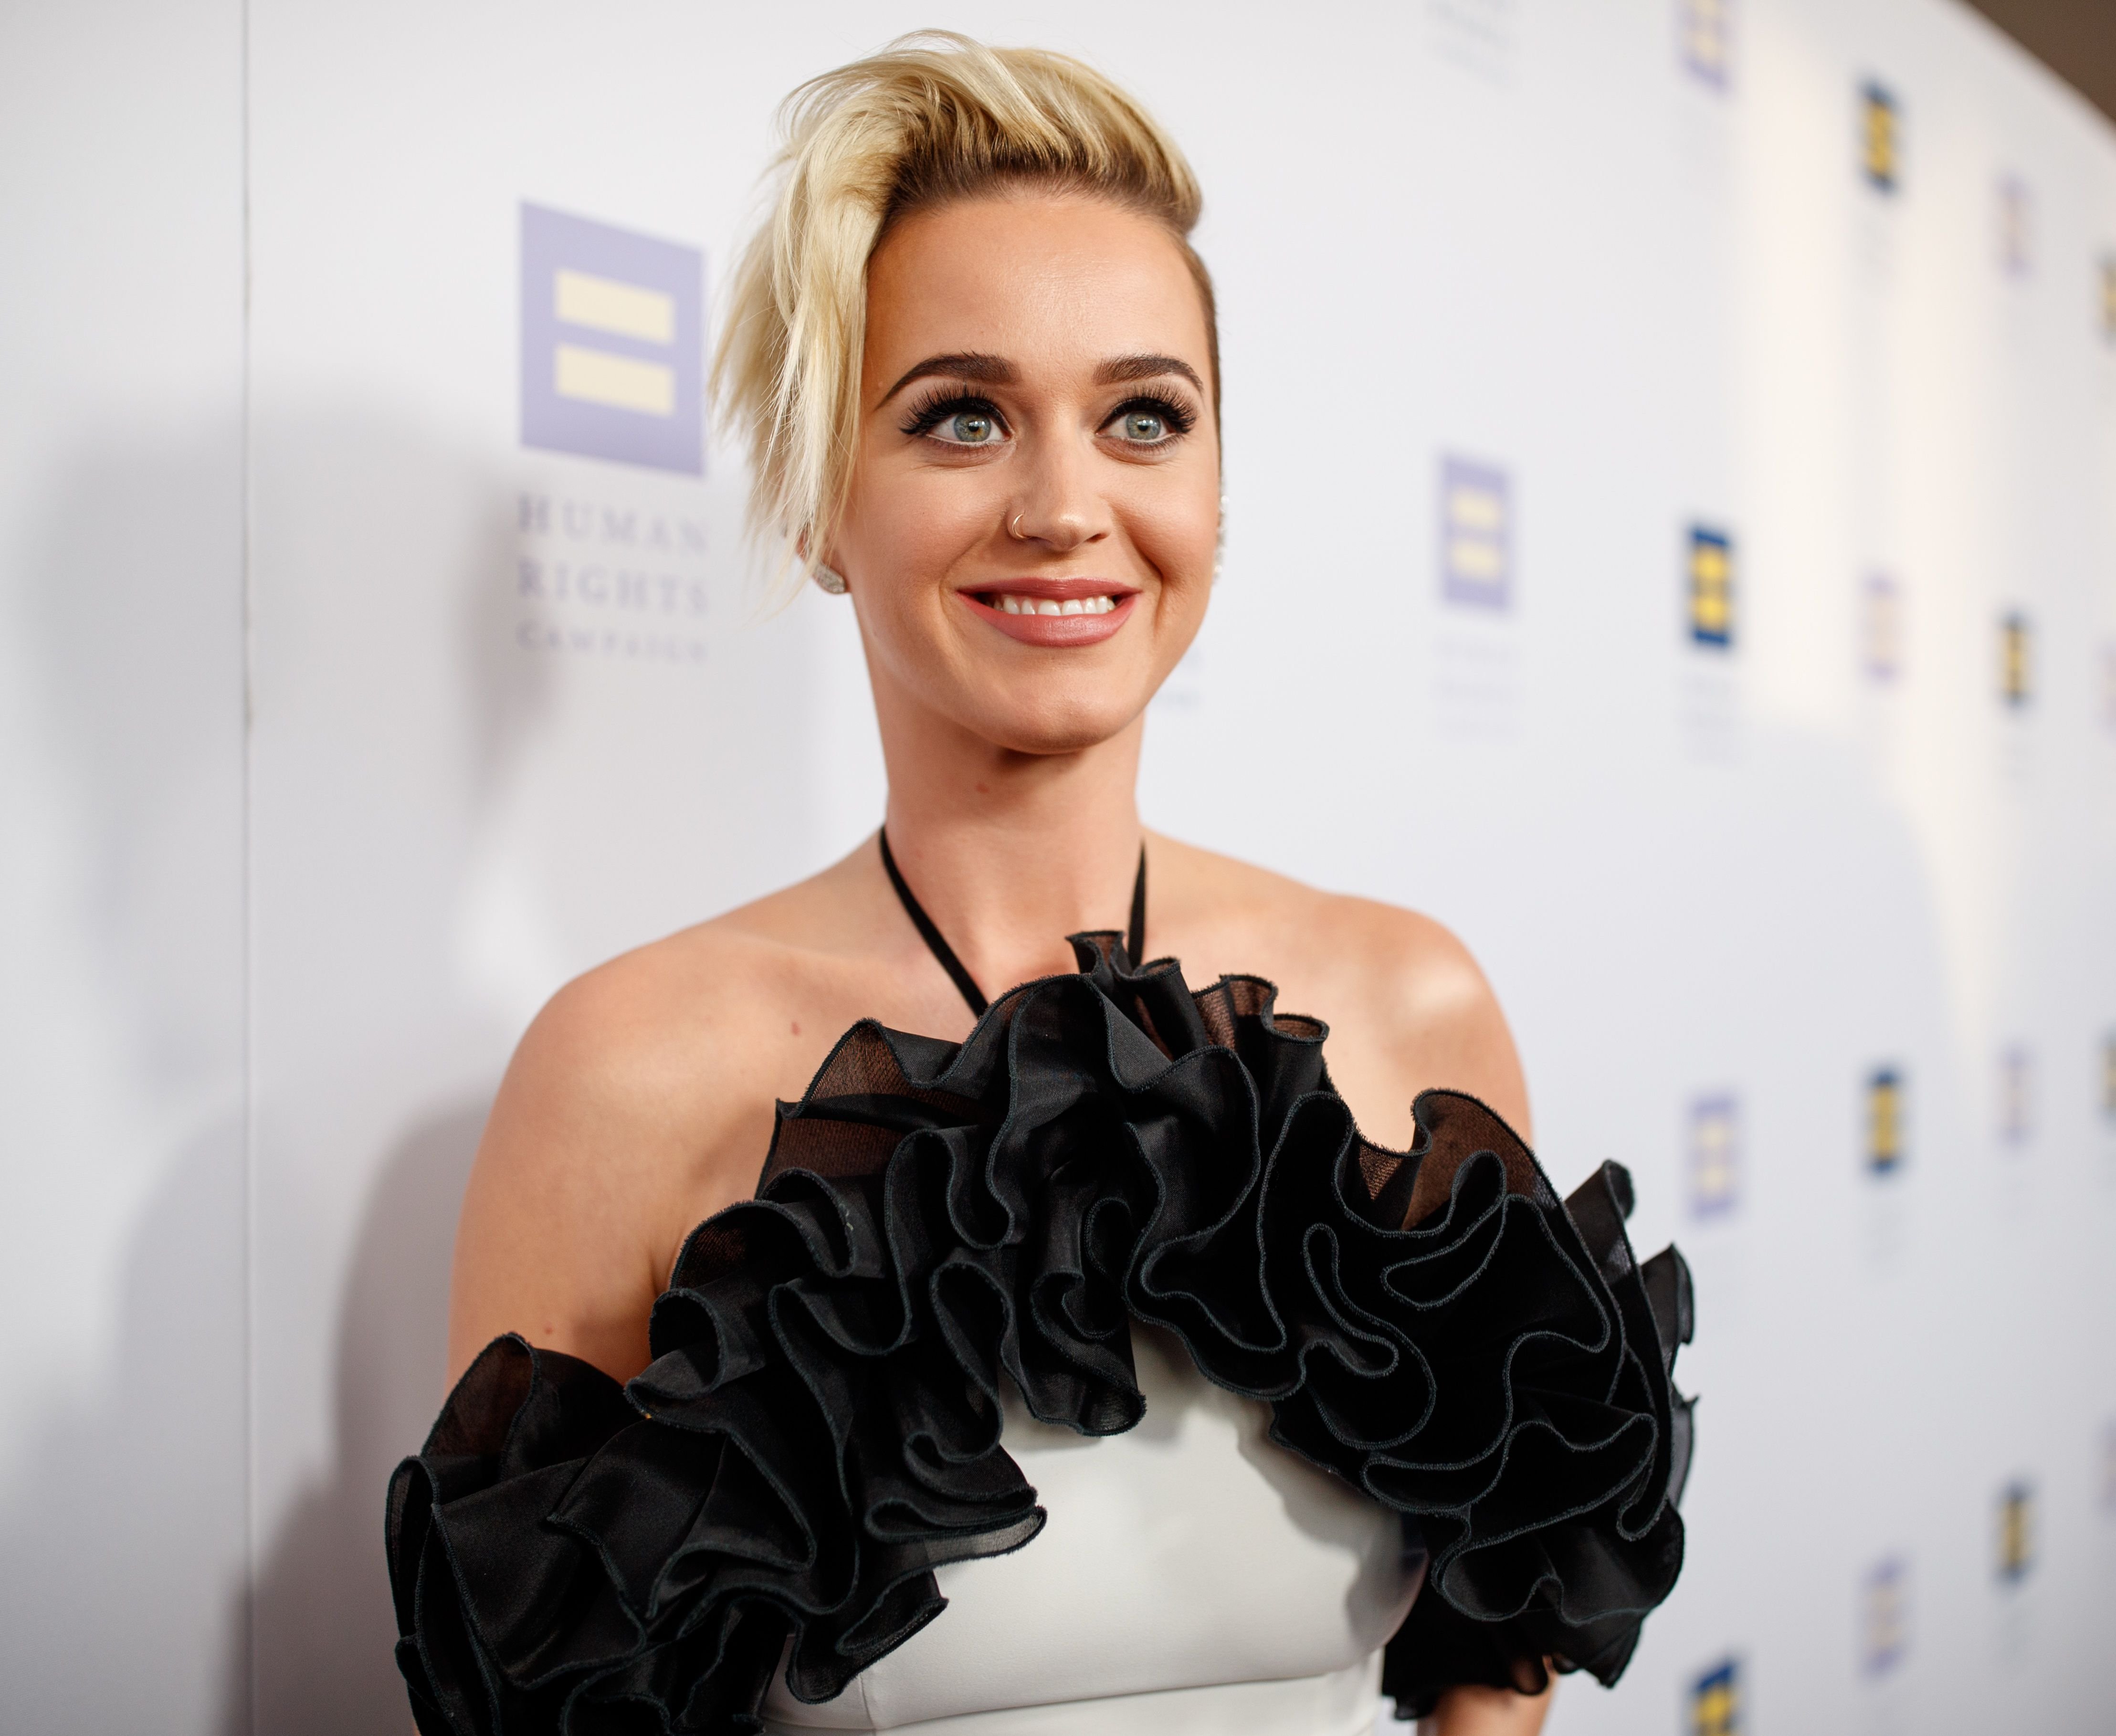 Katy Perry at The Human Rights Campaign Los Angeles Gala Dinner on March 18, 2017, in Los Angeles, California | Photo: Christopher Polk/Getty Images